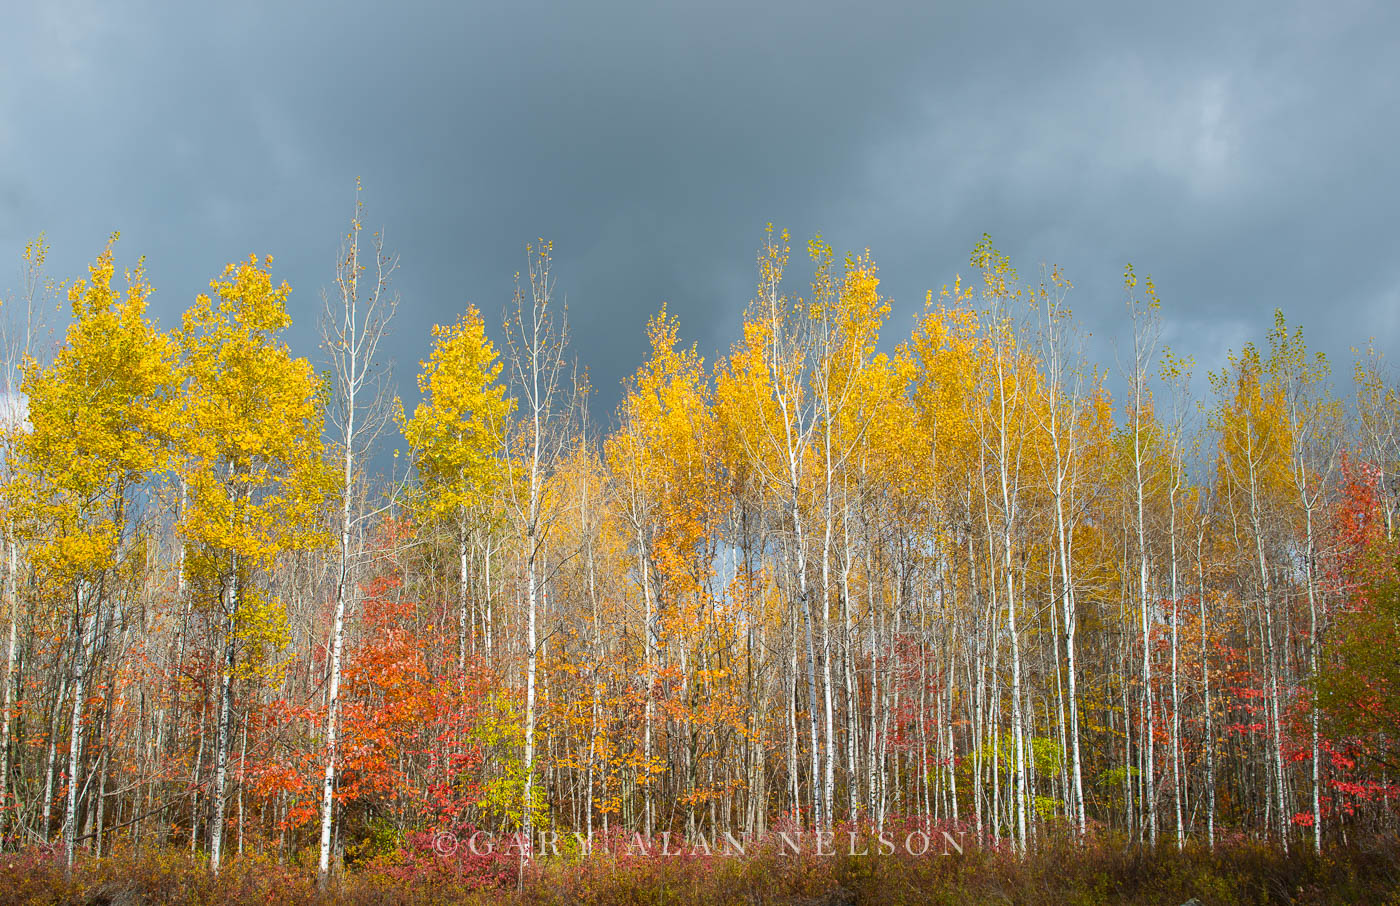 Autumn colors and clouds in the Superior National Forest, Minnesota.